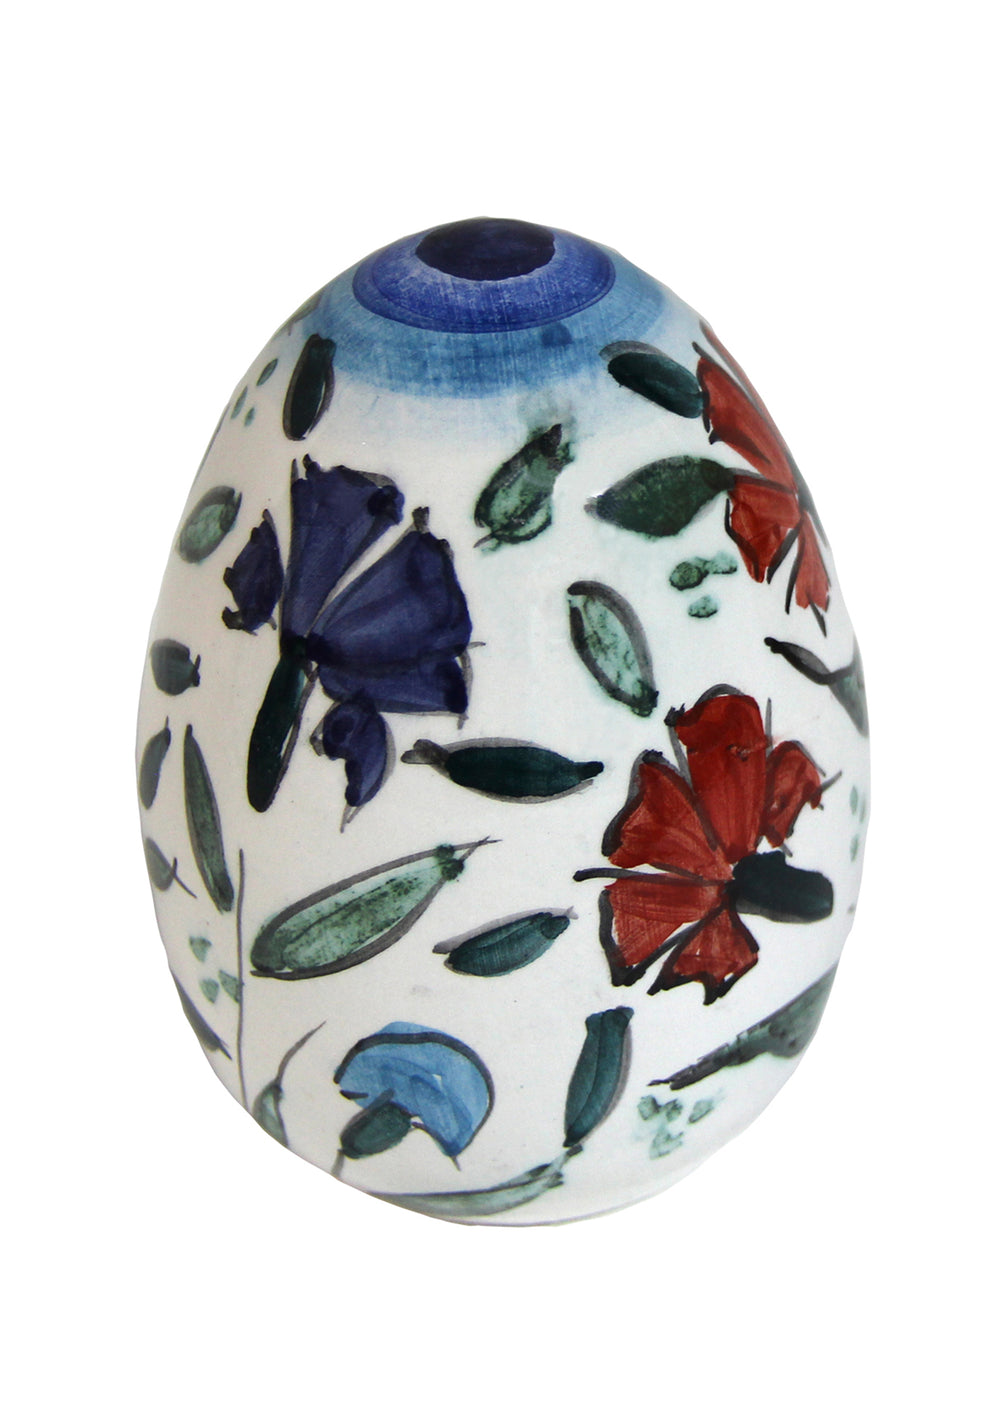 Ceramic egg with floral decoration